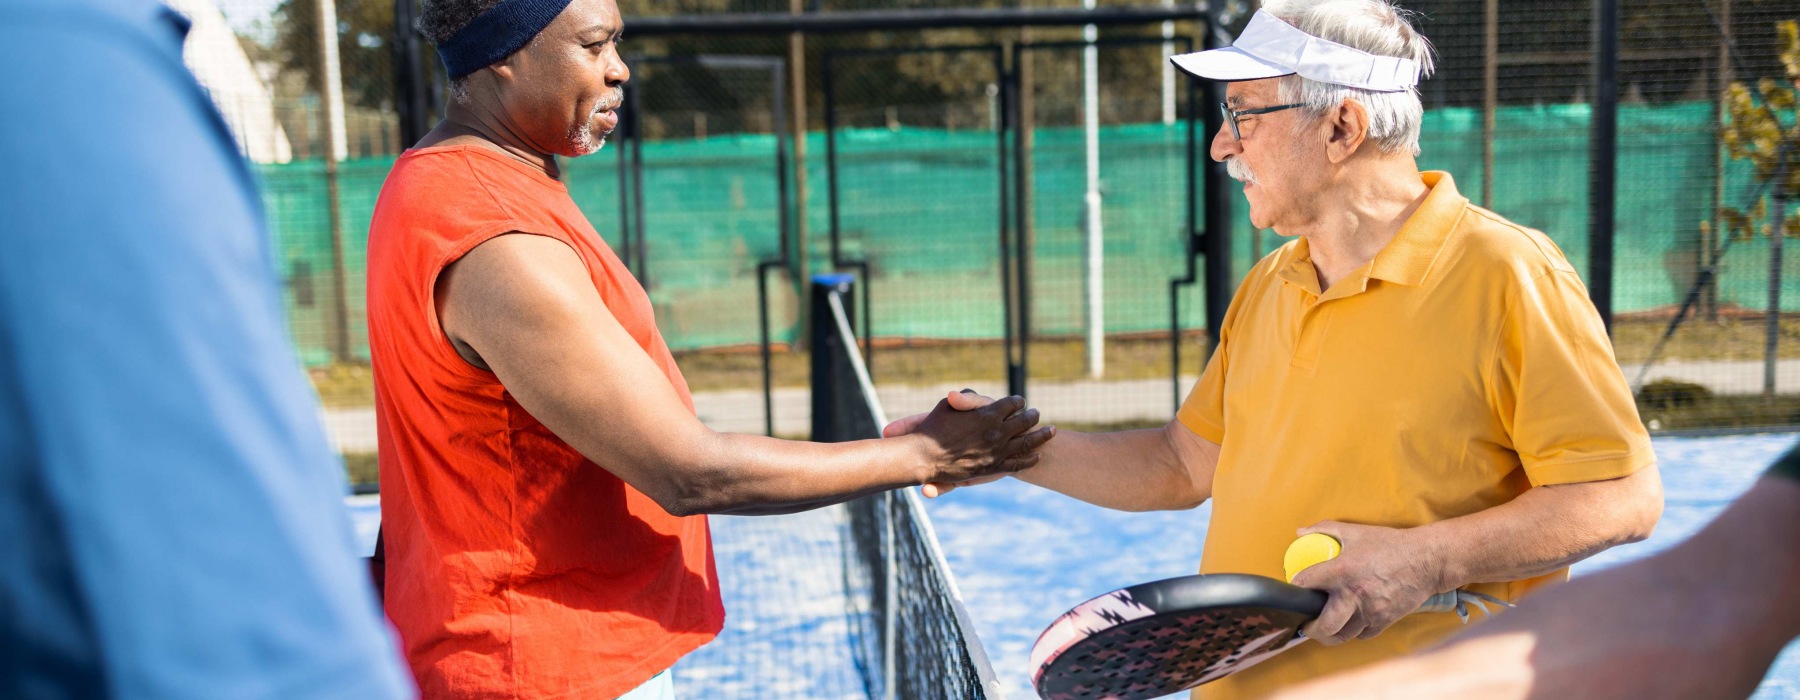 Pickleball: A Great Game for Active Adults